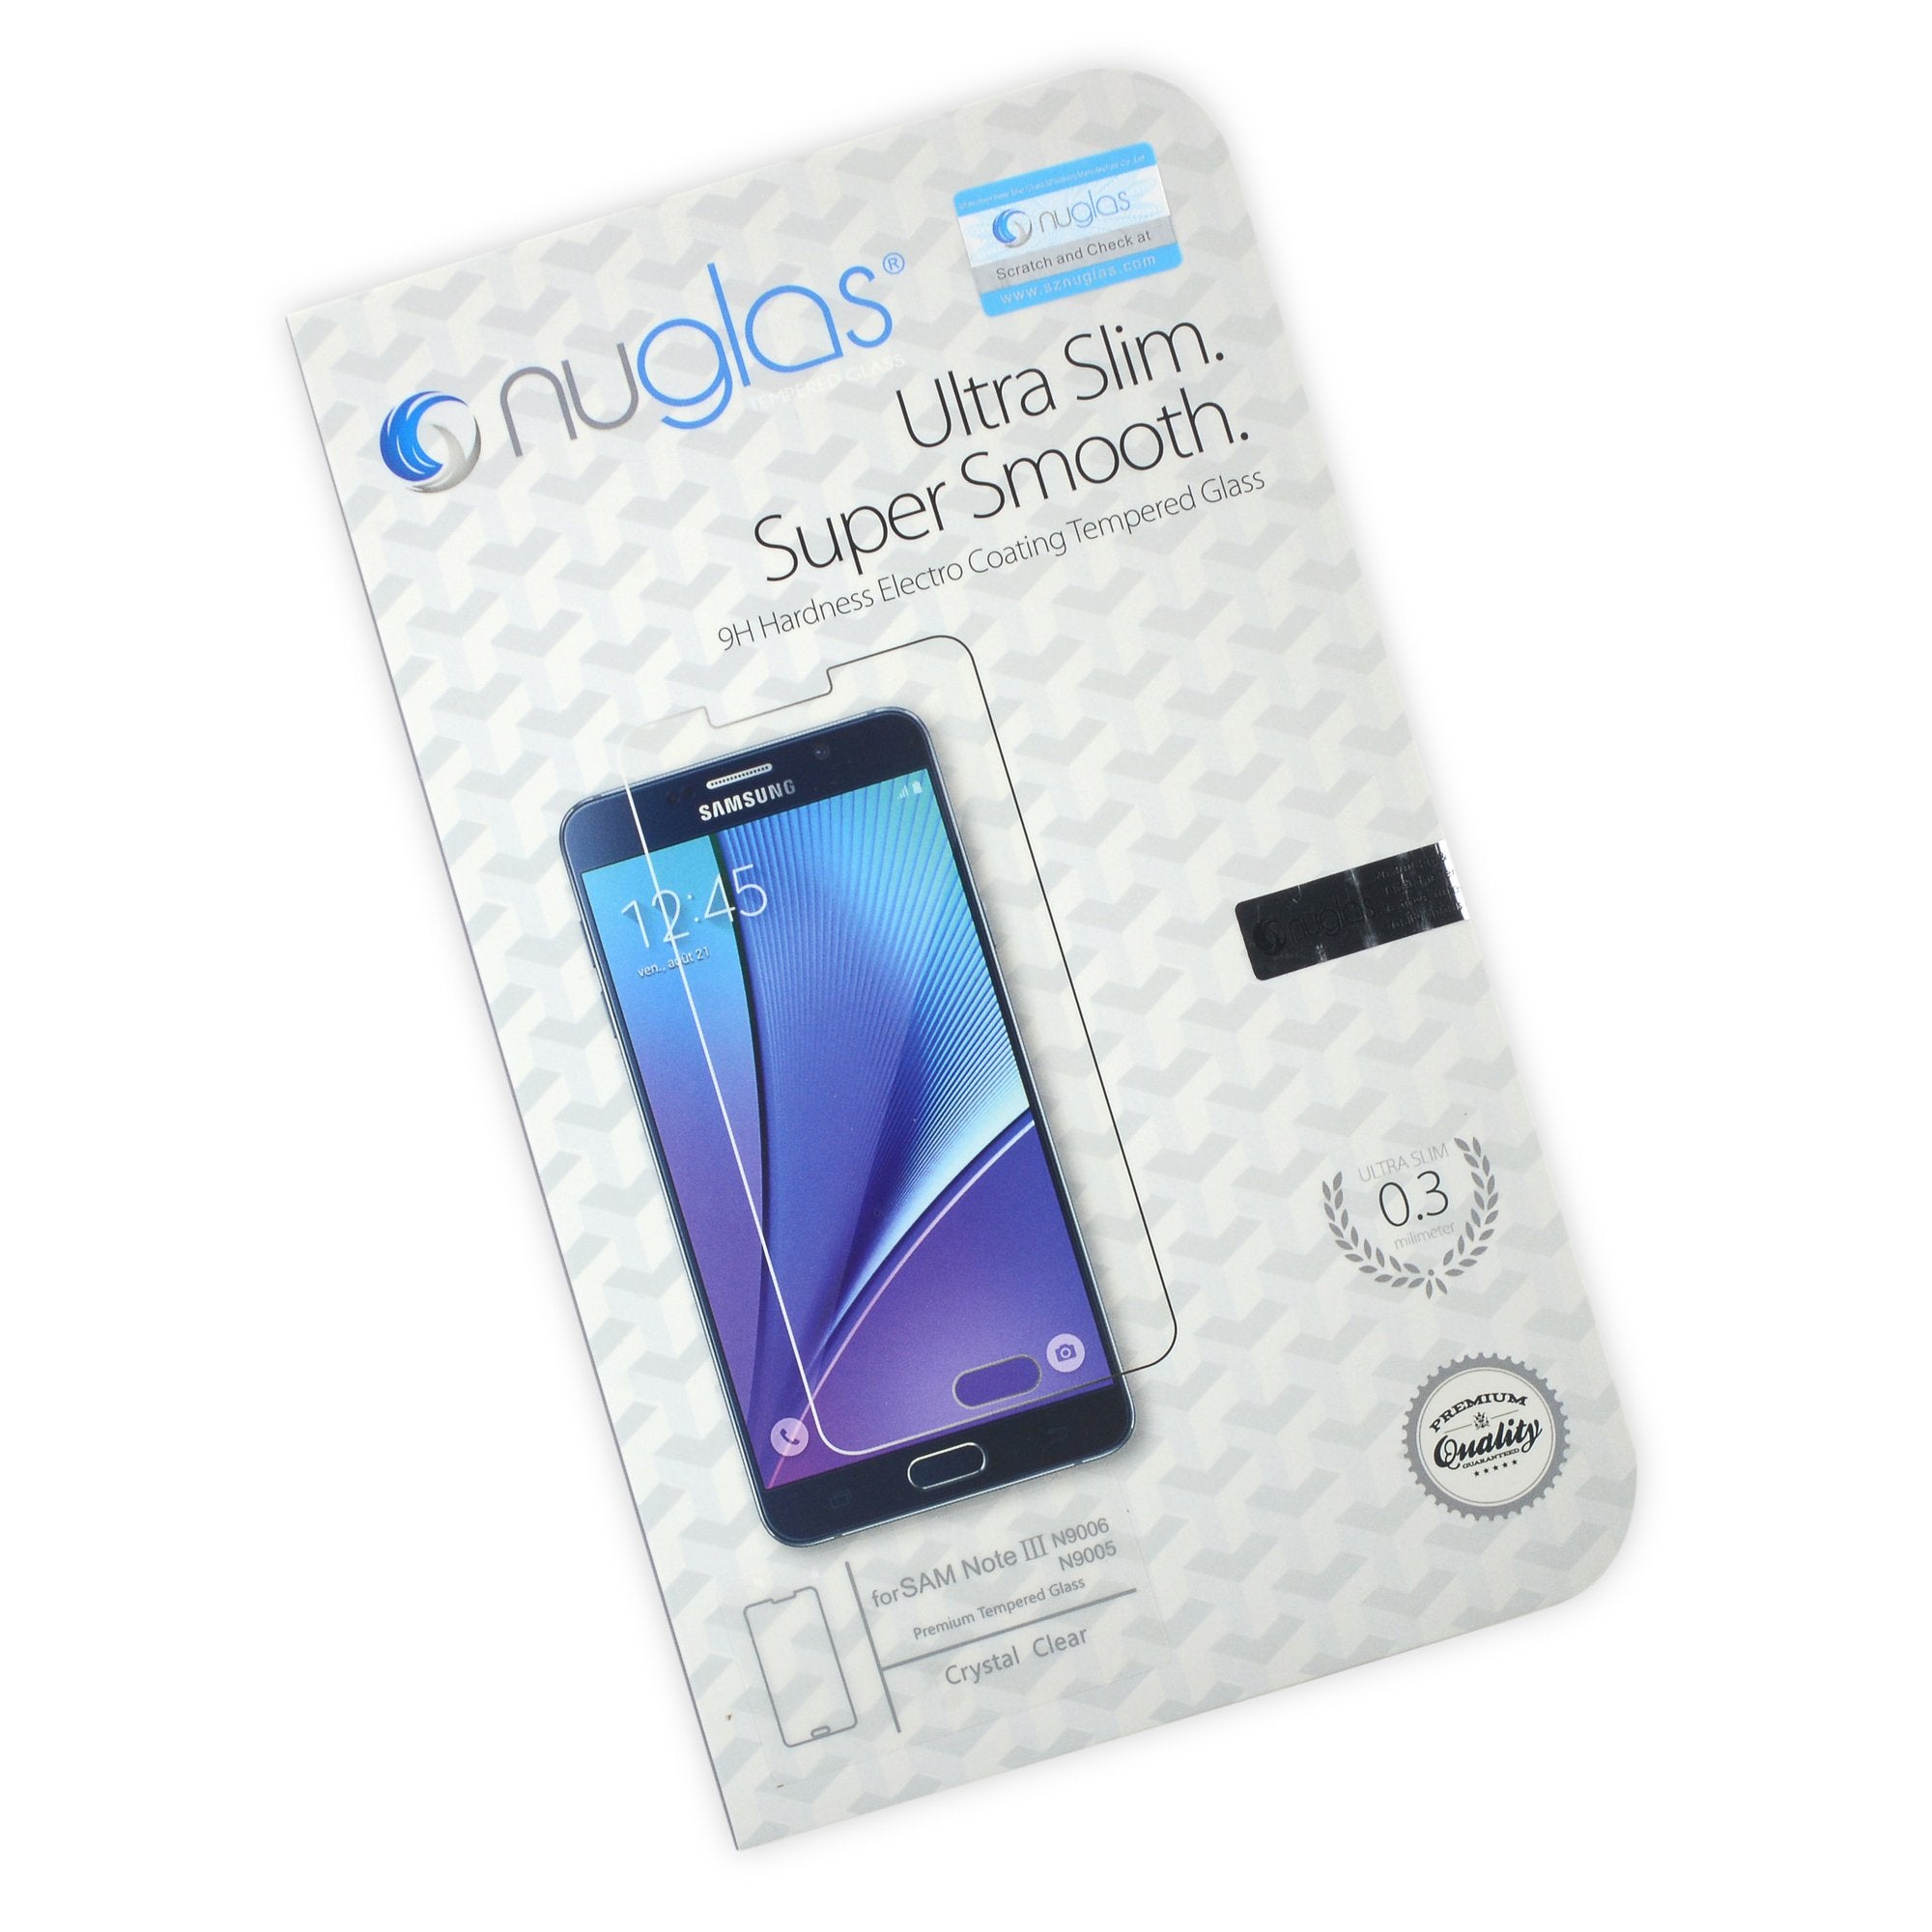 NuGlas Tempered Glass Screen Protector for Galaxy Note 3